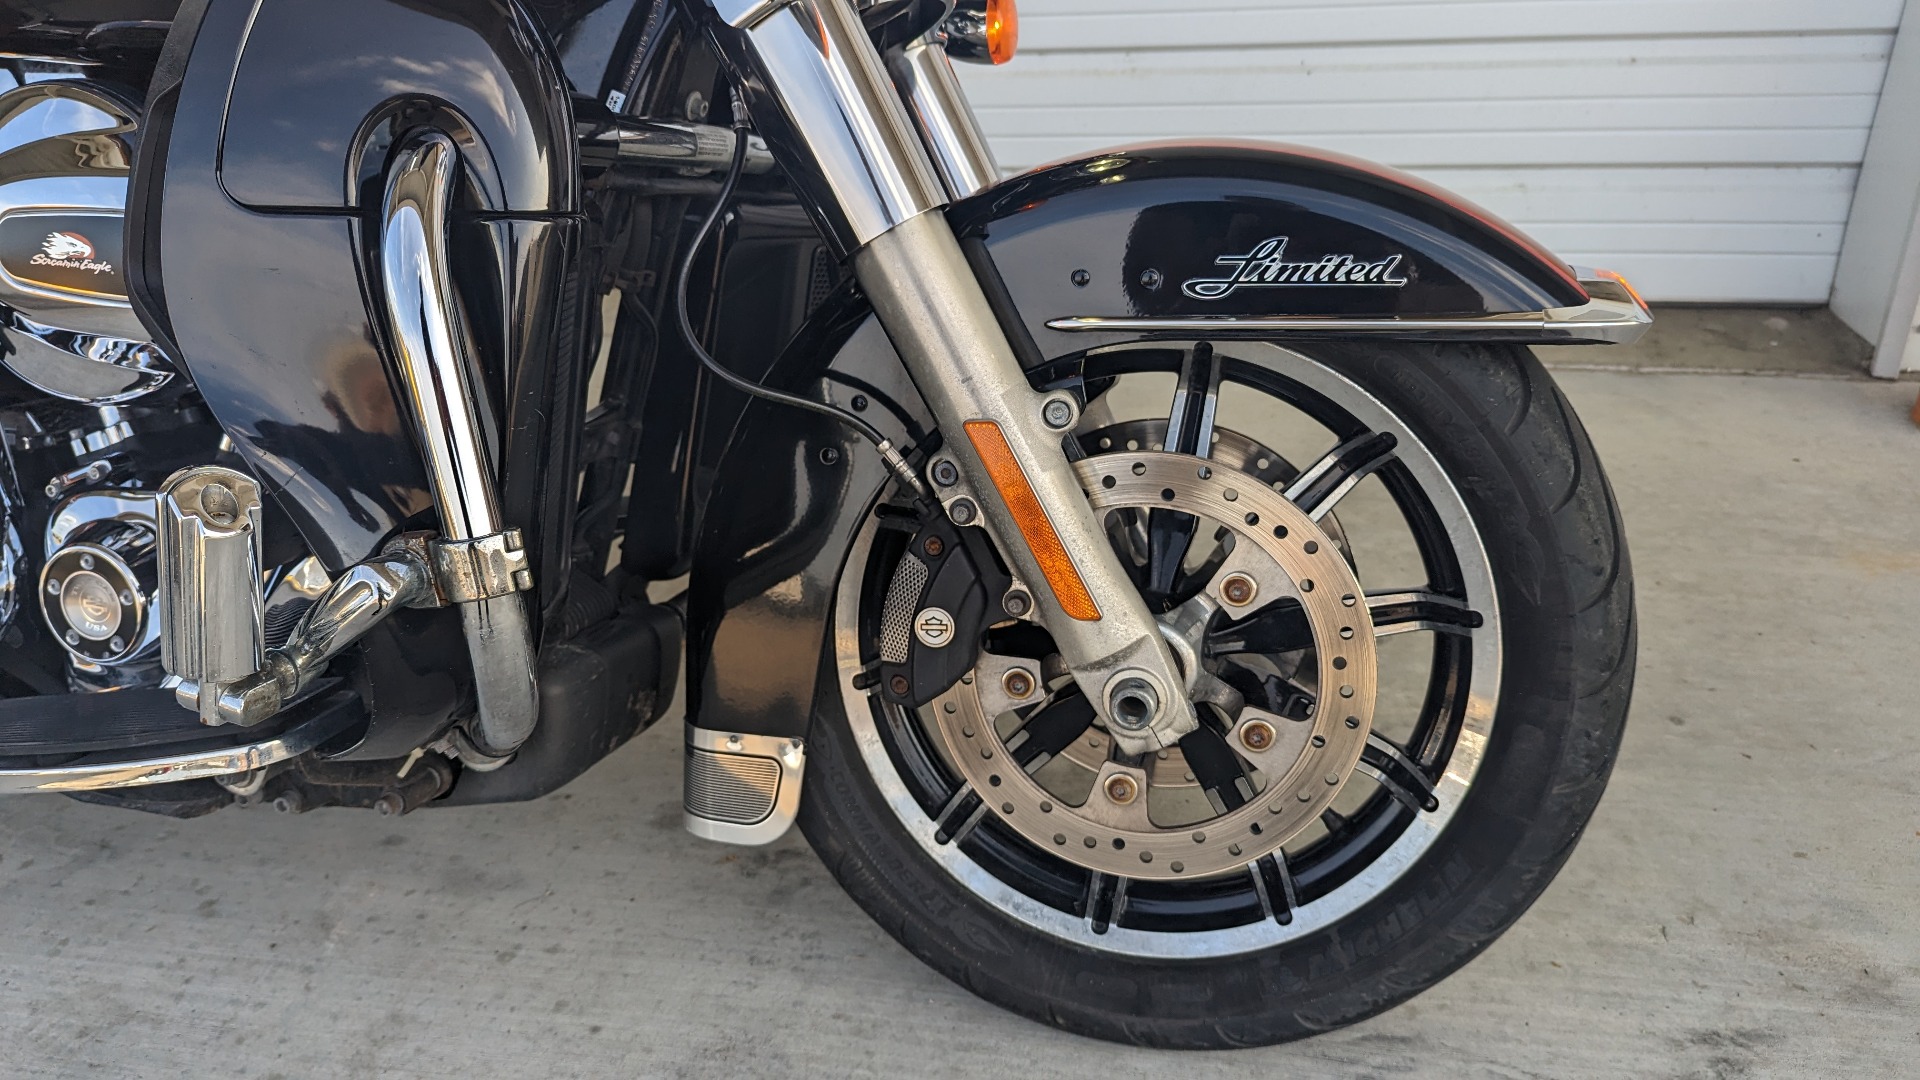 2014 harley davidson ultra limited for sale in dallas - Photo 3